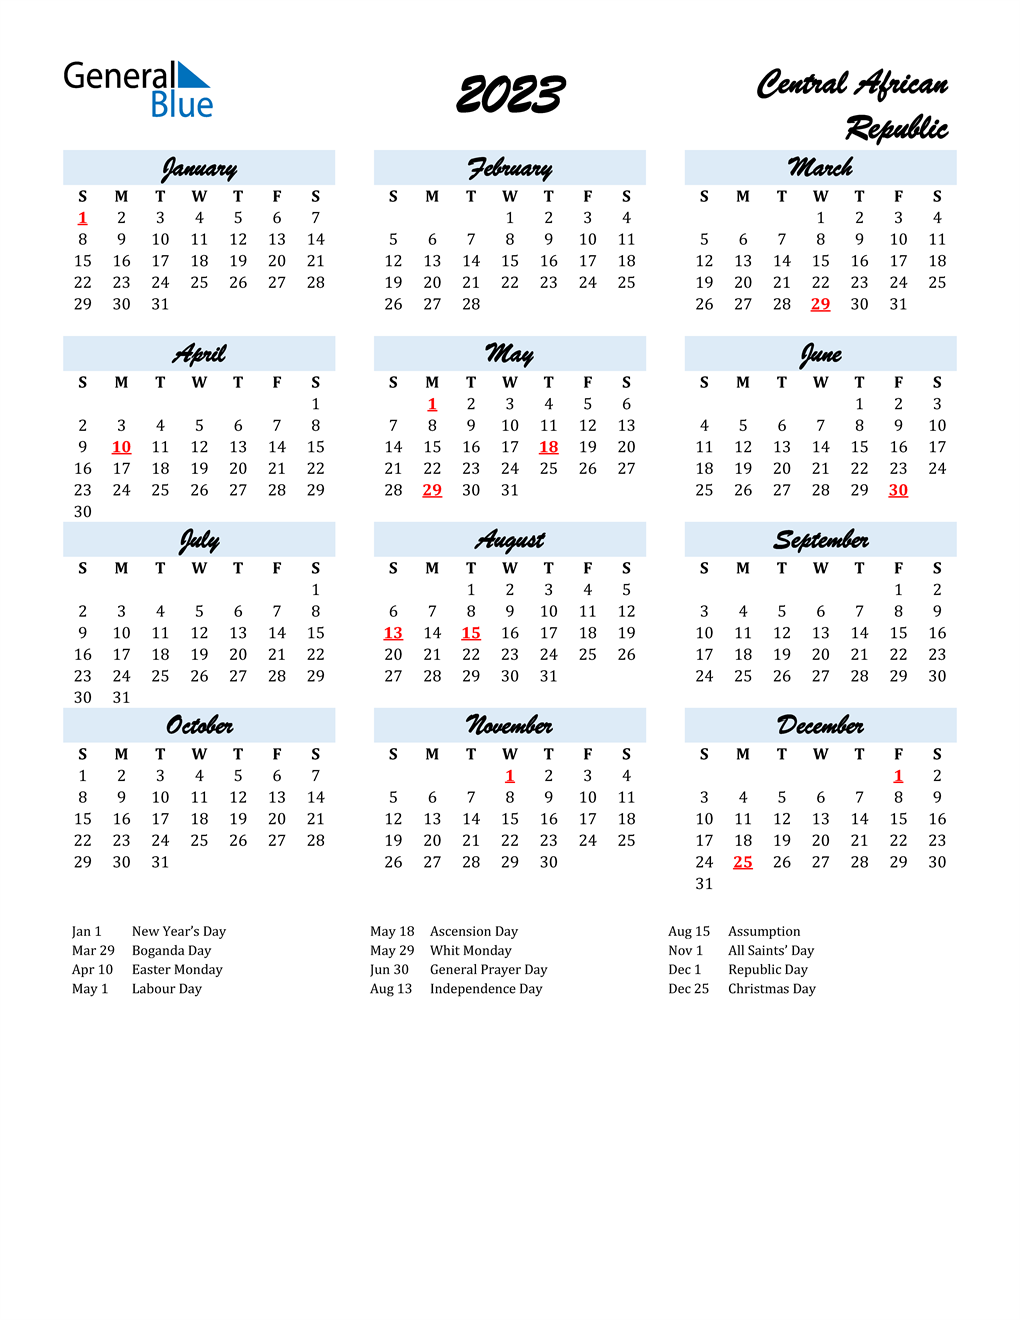 2023 Central African Republic Calendar with Holidays